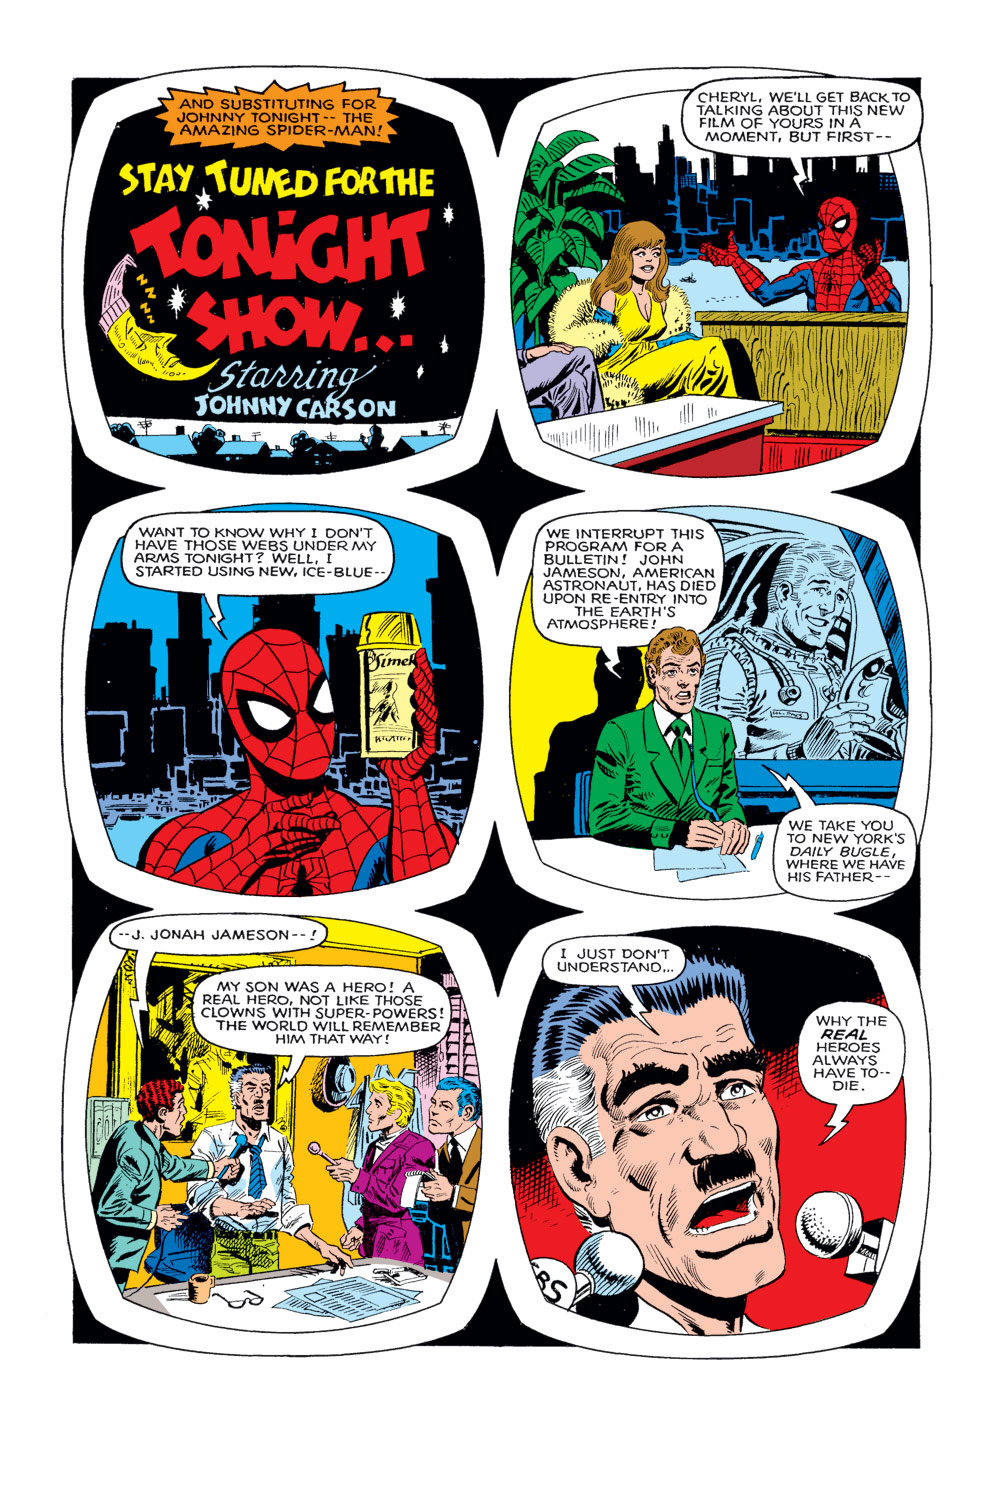 What If? (1977) issue 19 - Spider-Man had never become a crimefighter - Page 7